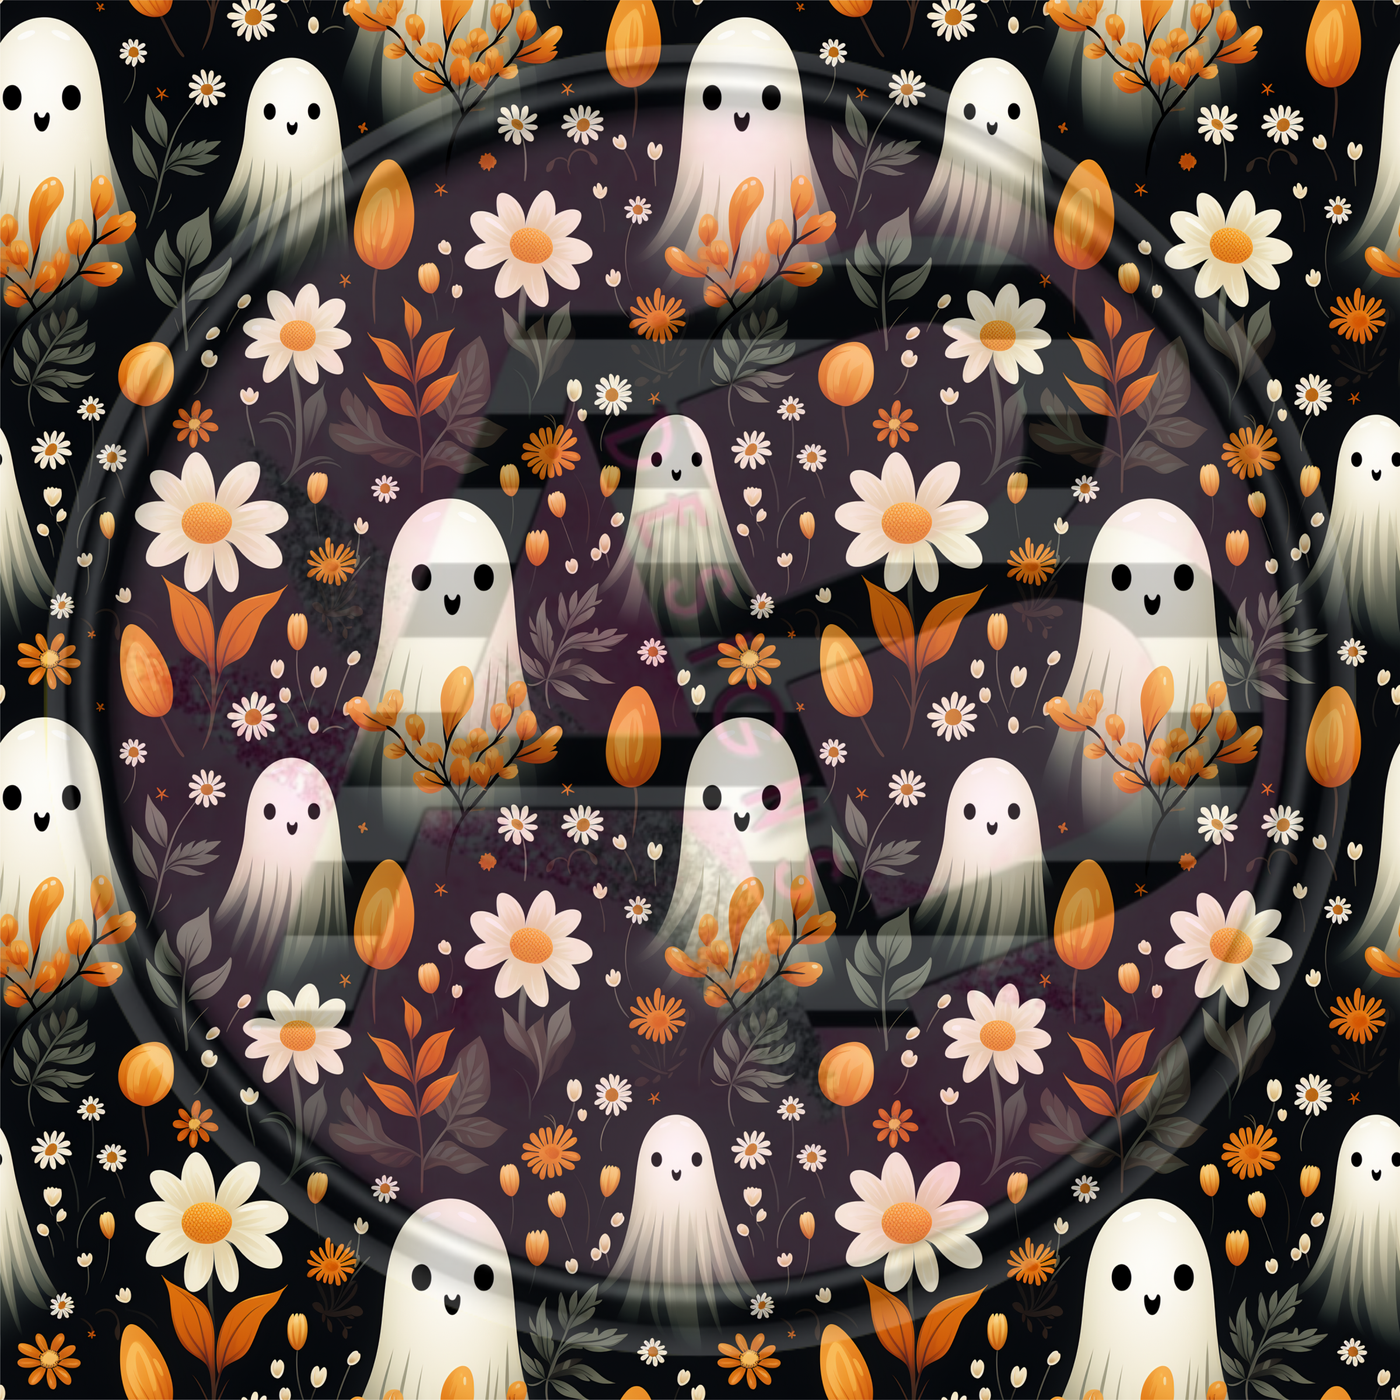 Adhesive Patterned Vinyl - Ghost 04 Smaller